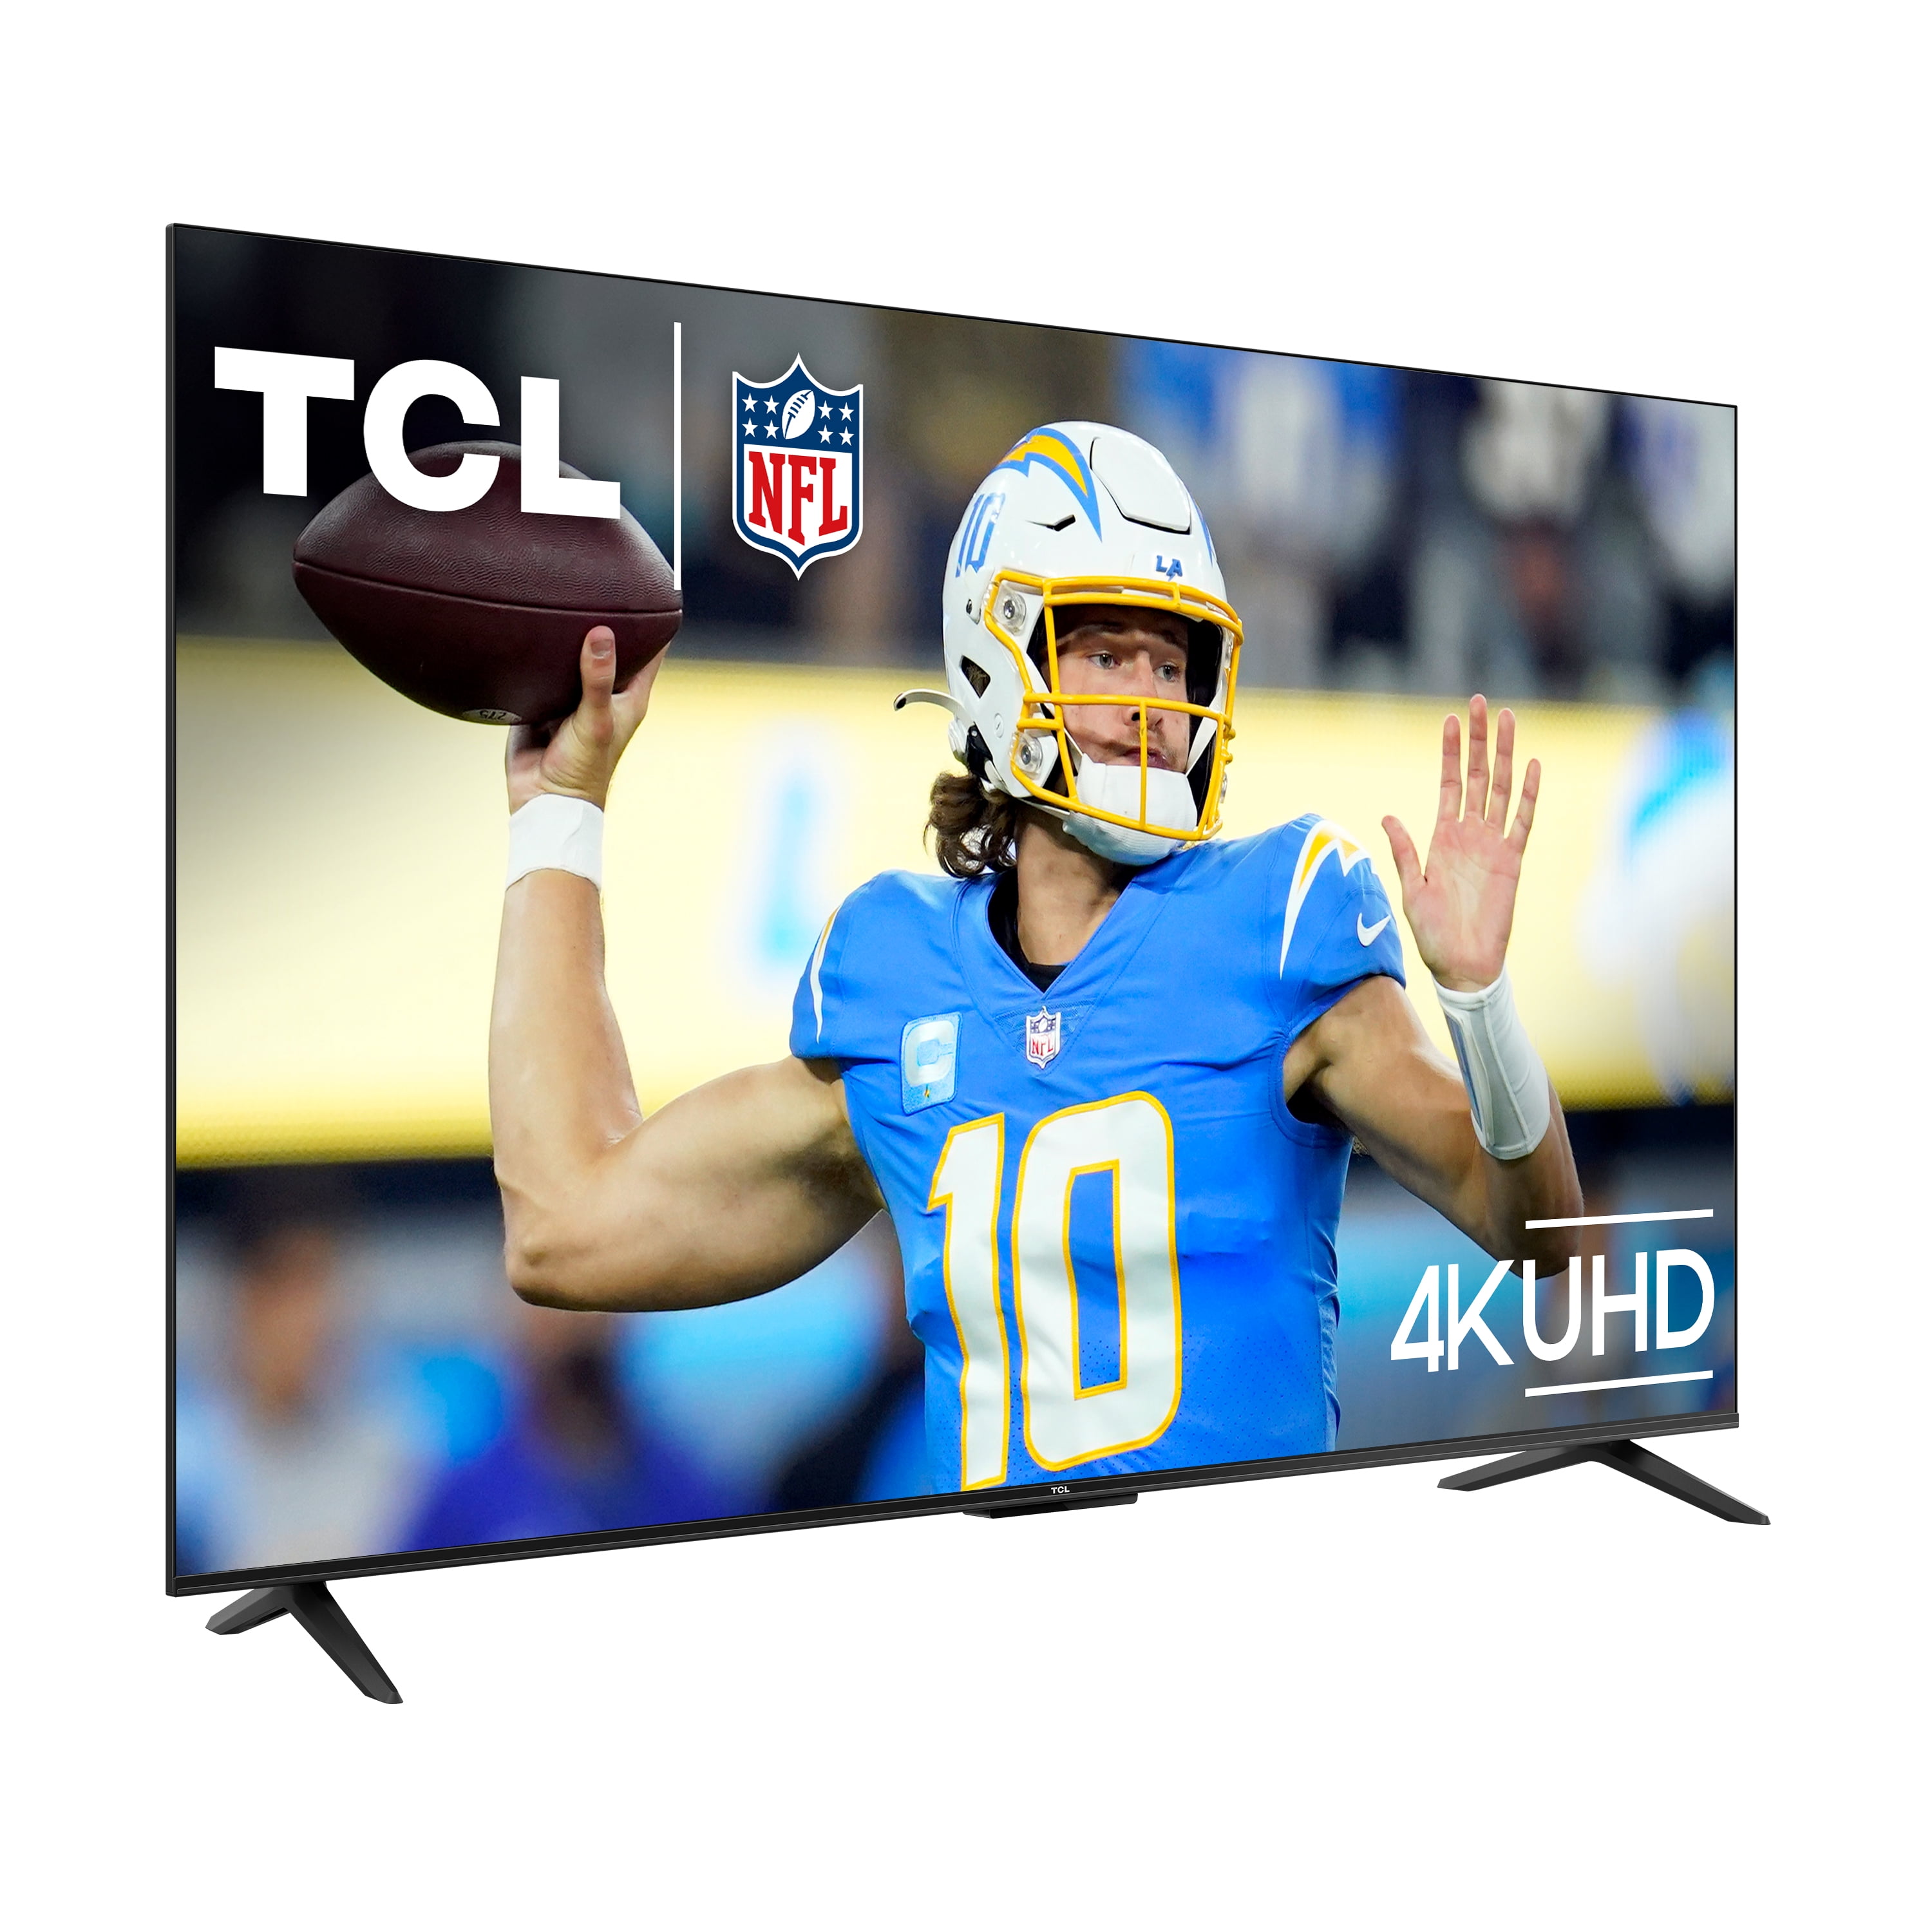 TCL 55” Class S Class 4K UHD HDR LED Smart TV with Google TV, 55S450G 